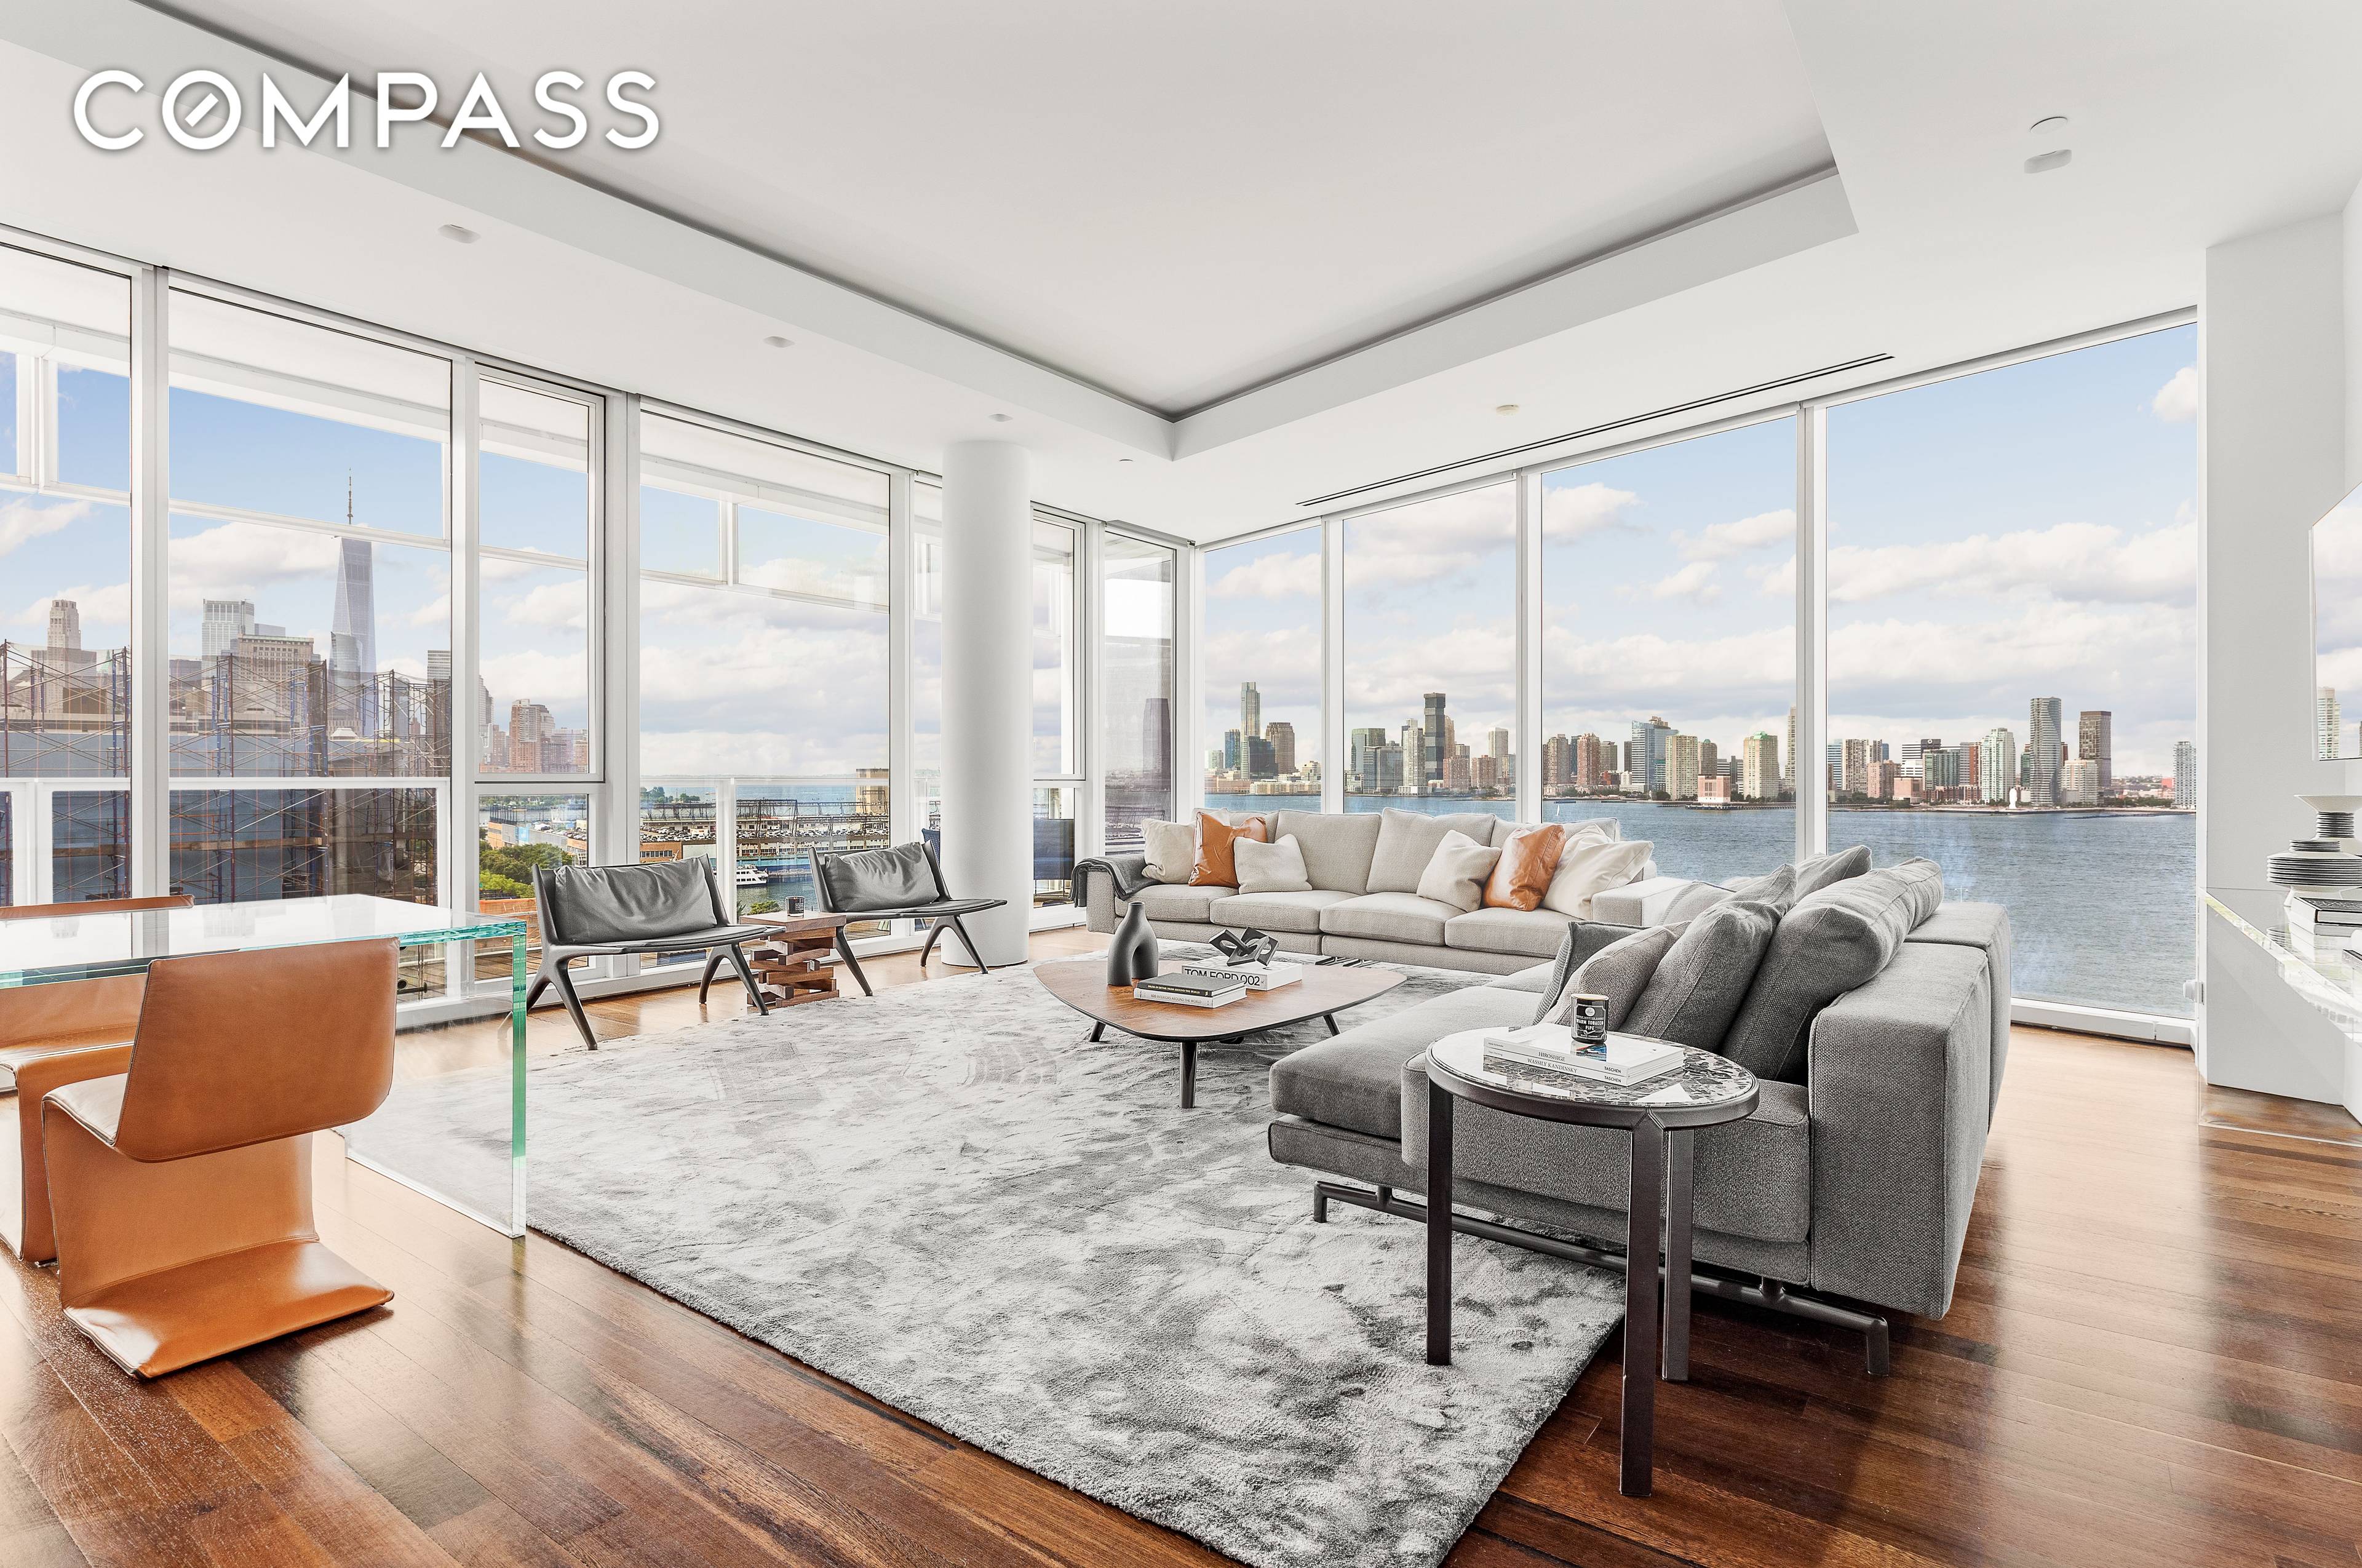 Unobstructed views from 165 Charles Street on the 10th floor, this stunning 2541 square foot loft offers unparalleled Hudson River and city skyline views.